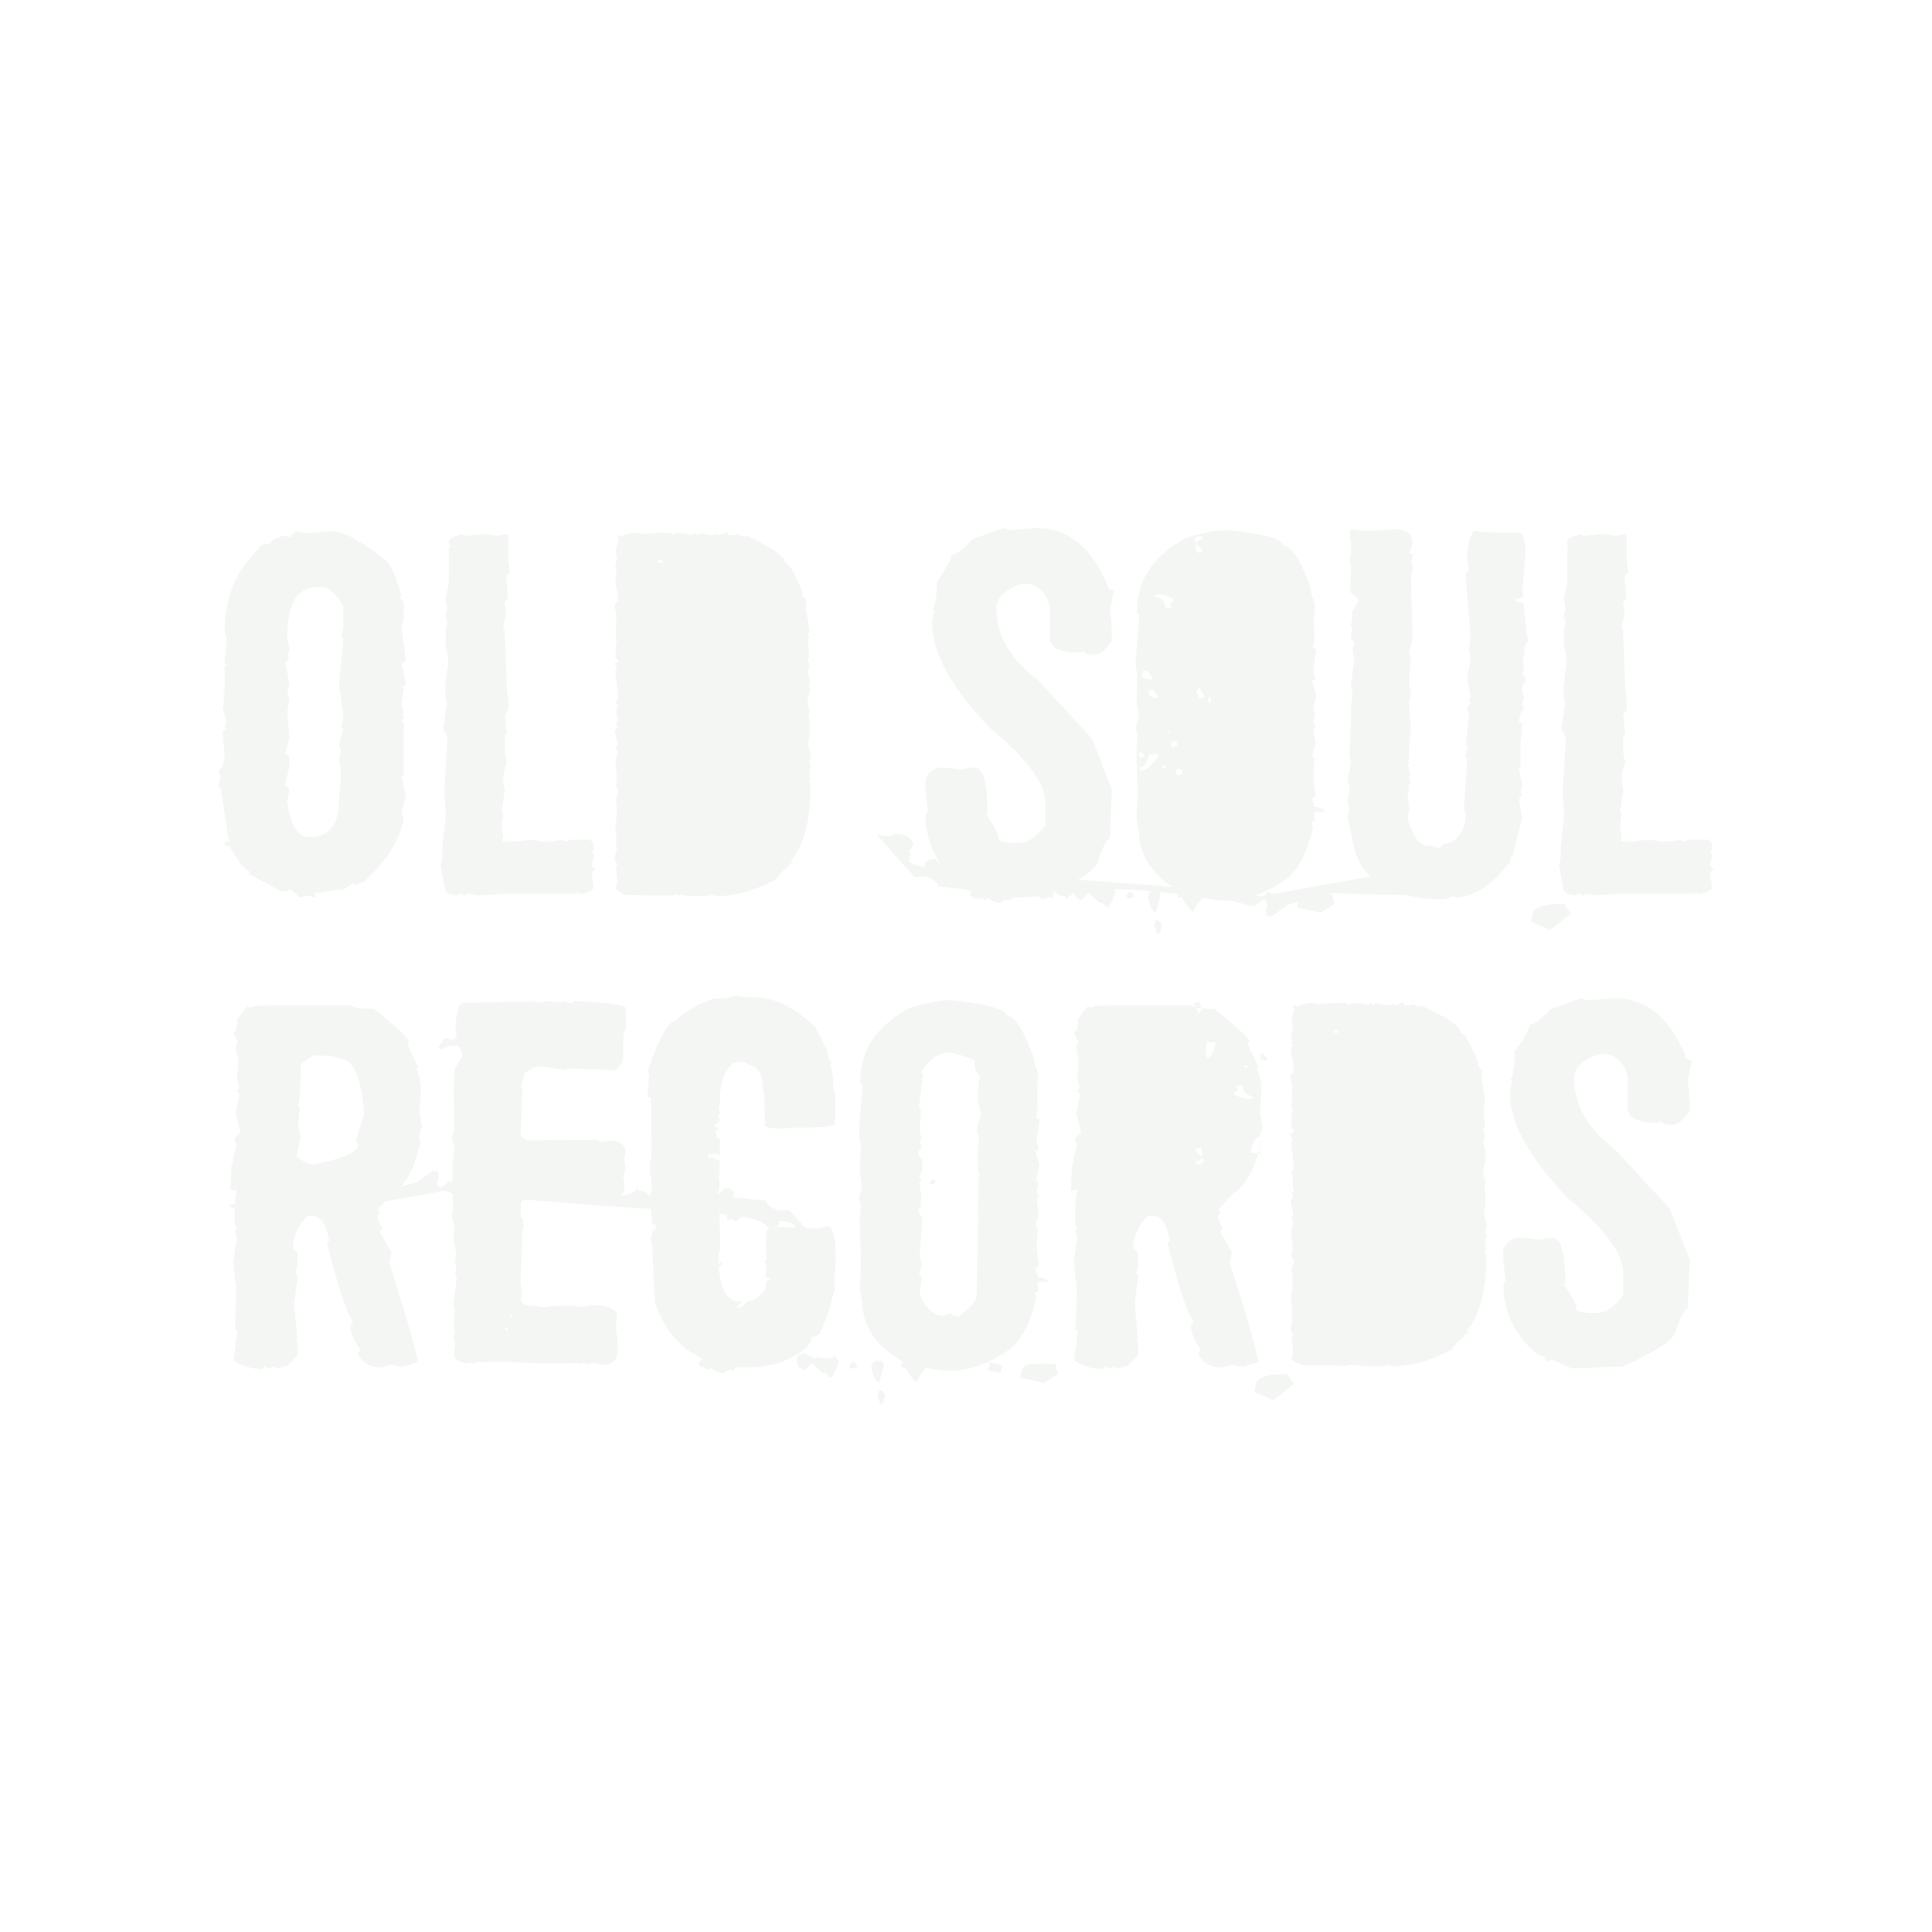 Old Soul Records